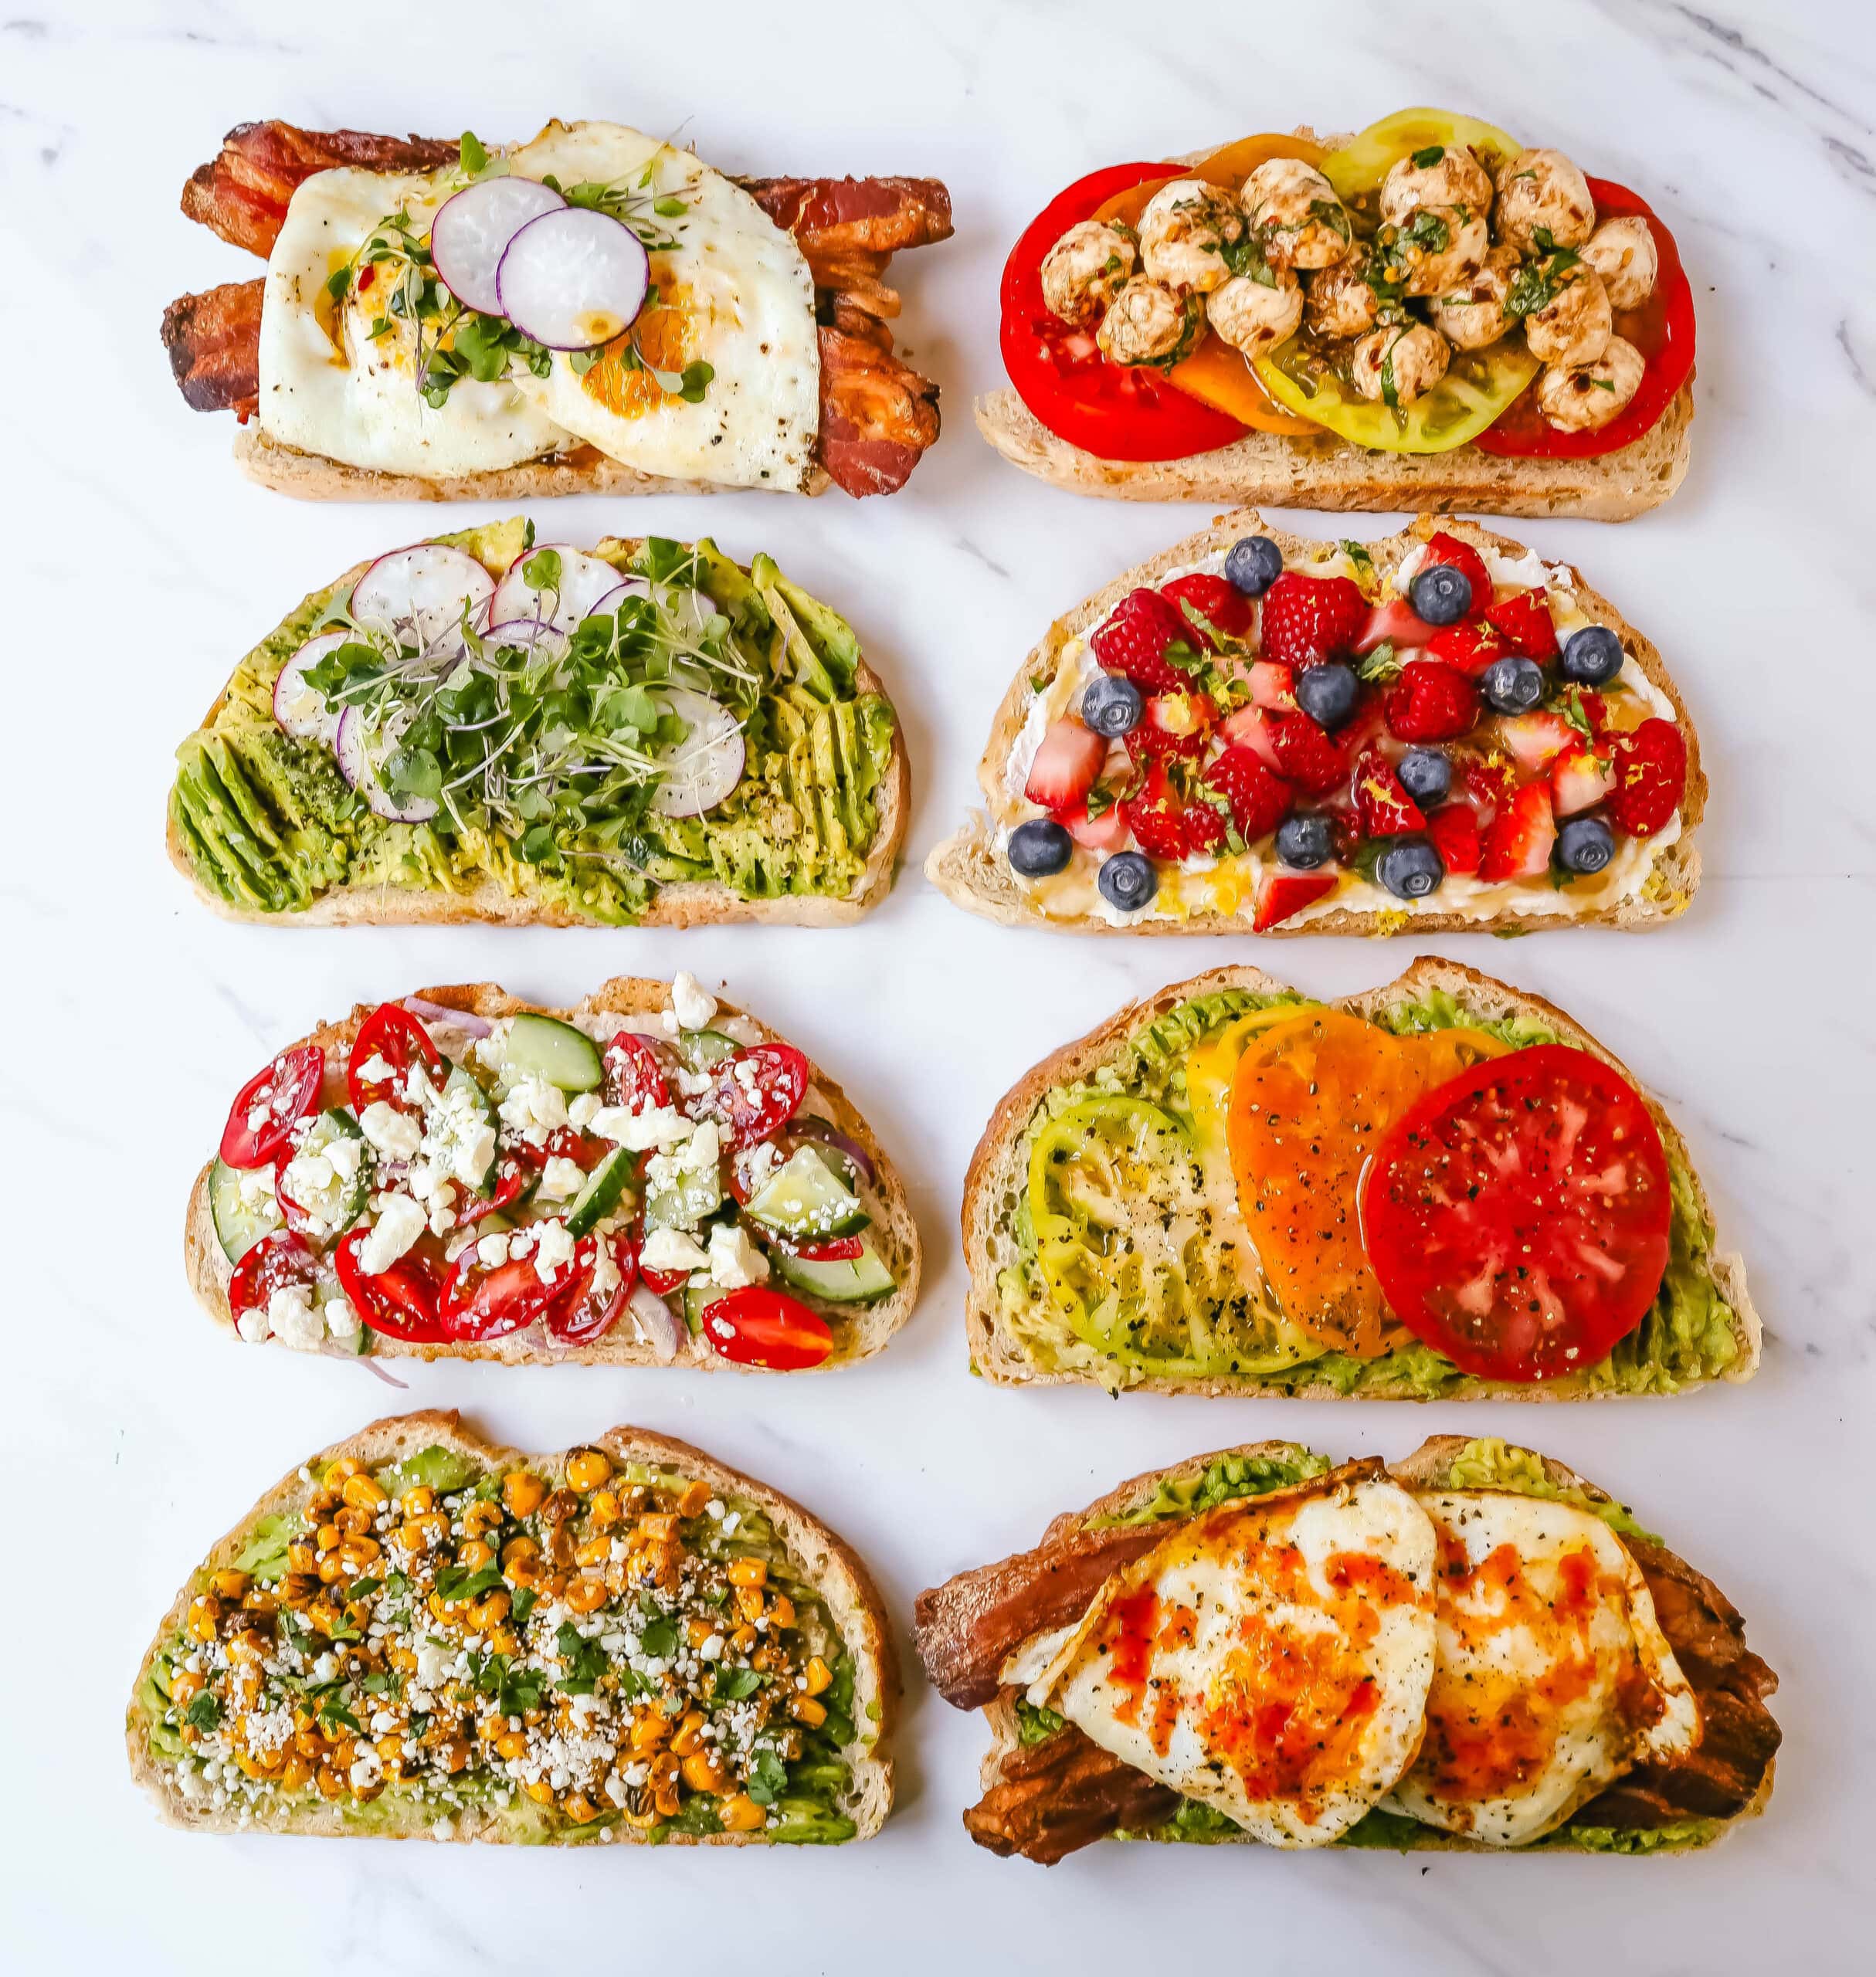 Avocado Toast, Avocado Toast with Egg, Ricotta Toast, Avocado Toast with Bacon, Avocado Toast with Tomato.Gourmet Toast Ideas are perfect for quick lunches or for serving at a party. Avocado Toast topping ideas and suggestions for what to put on top of avocado toast. 